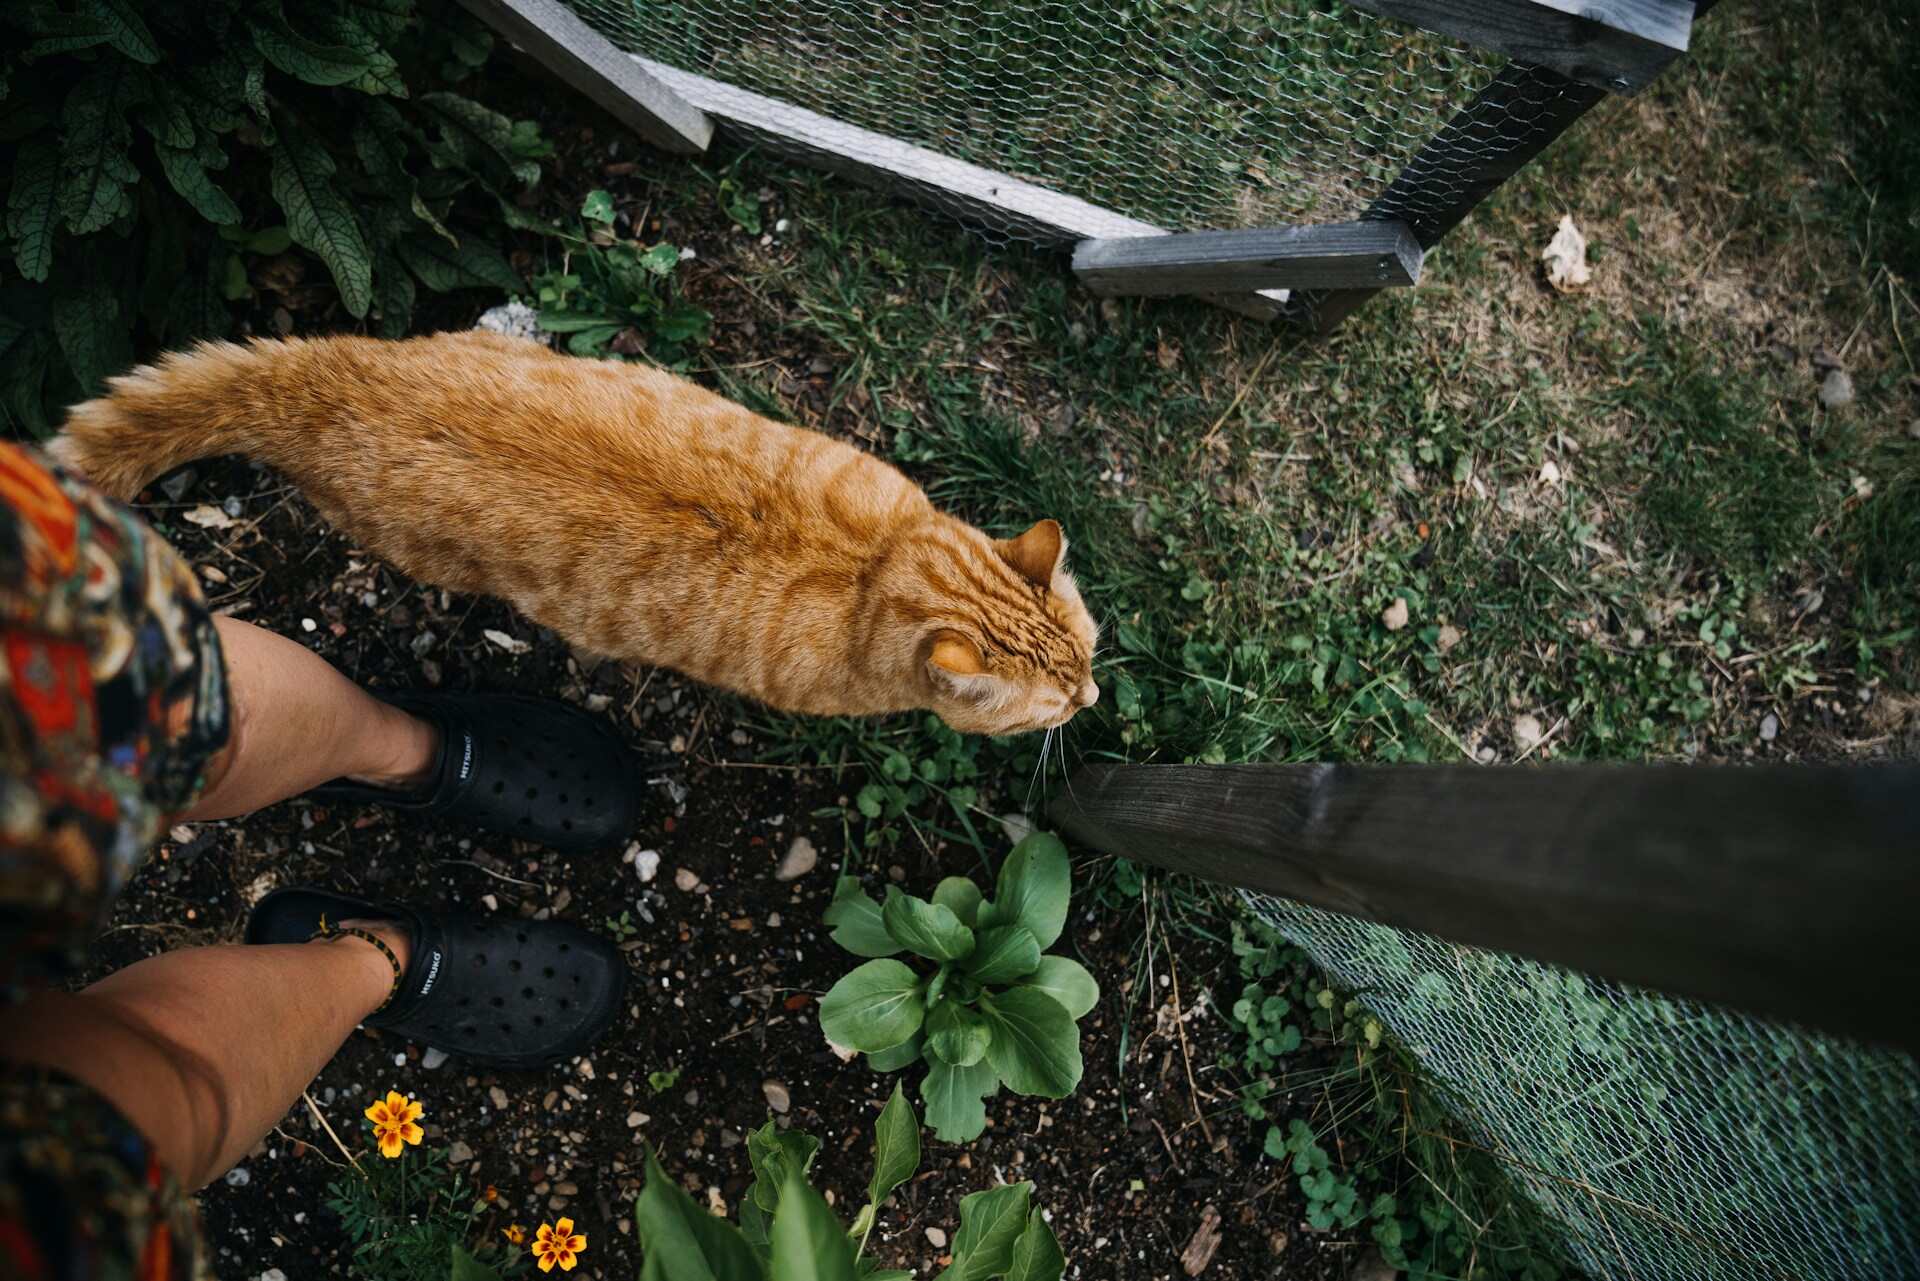 A man and cat standing together in a garden